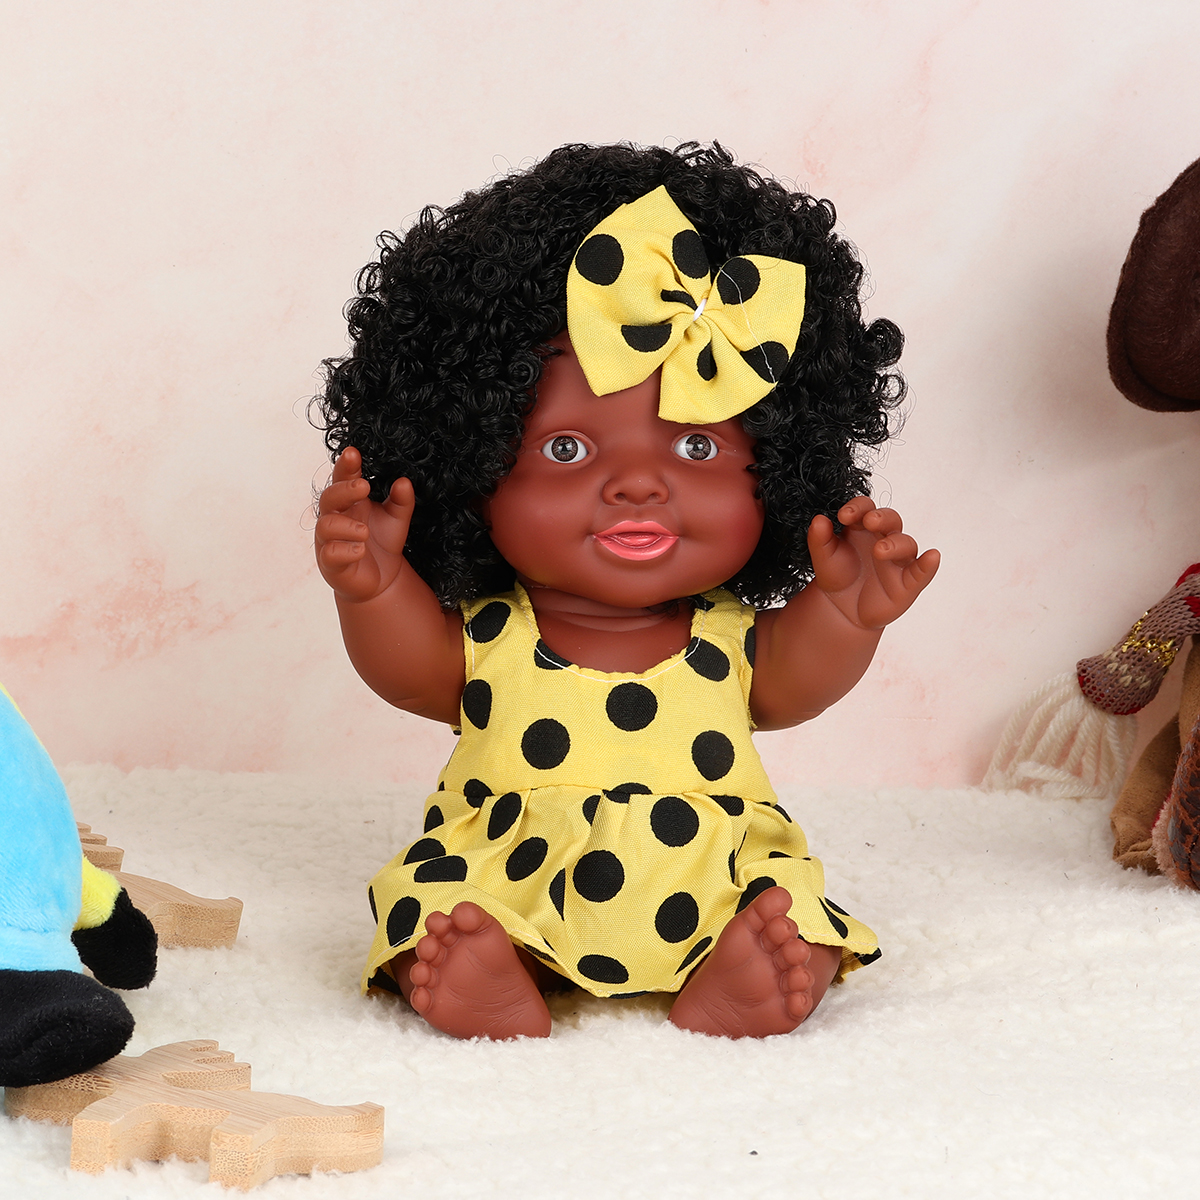 25CM-Cute-Soft-Silicone-Joint-Movable-Lifelike-Realistic-African-Black-Reborn-Baby-Doll-for-Kids-Gif-1733542-8